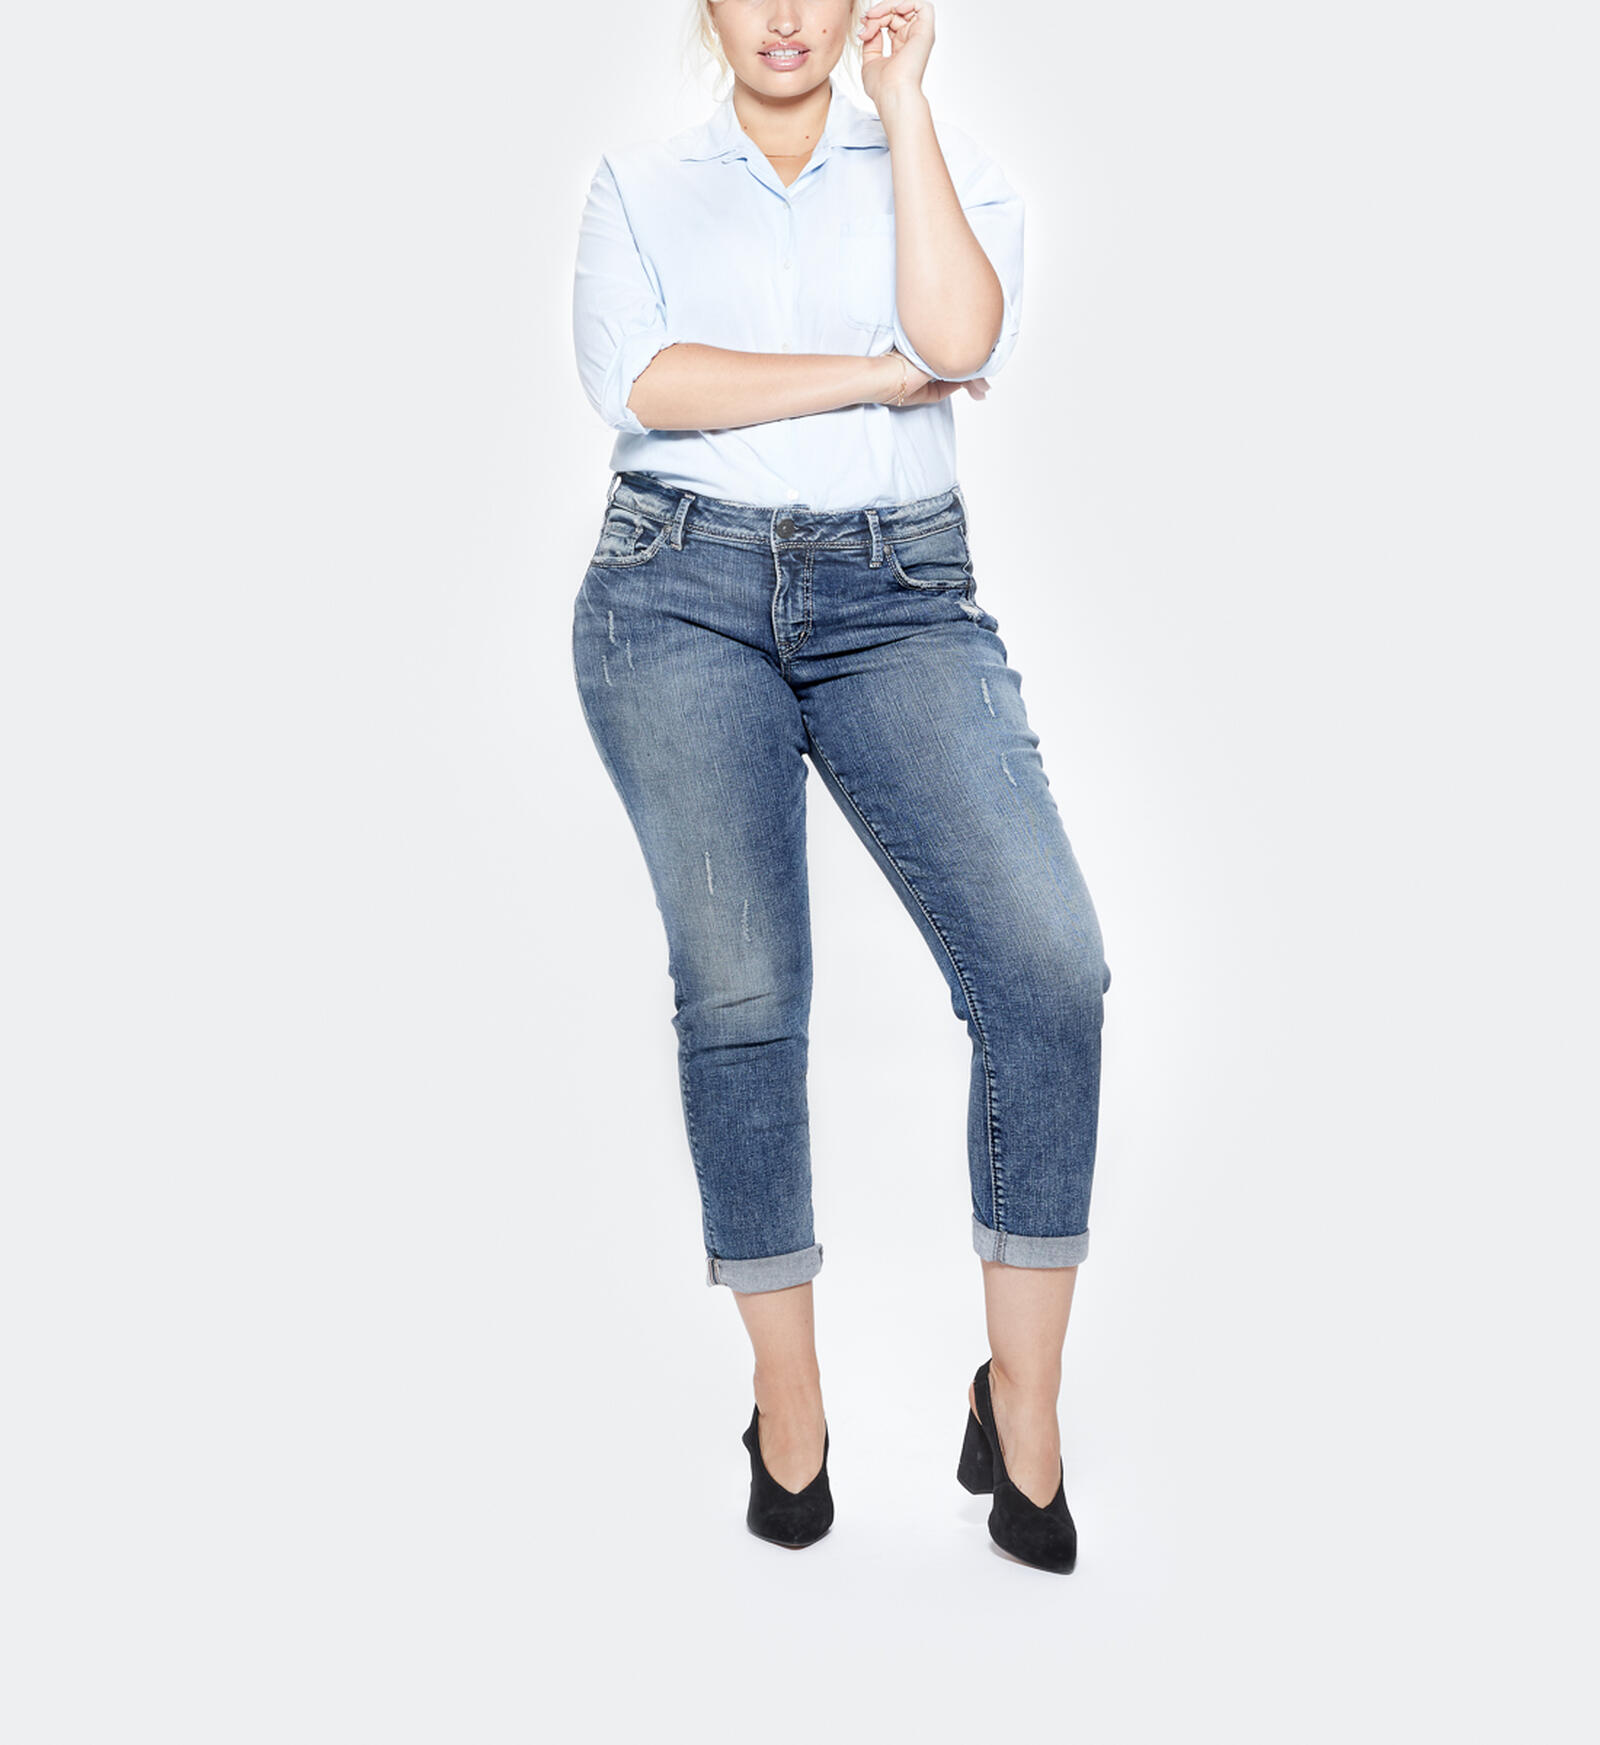 Buy Sam Plus Size Medium Wash for USD 89.00 | Silver Jeans US New